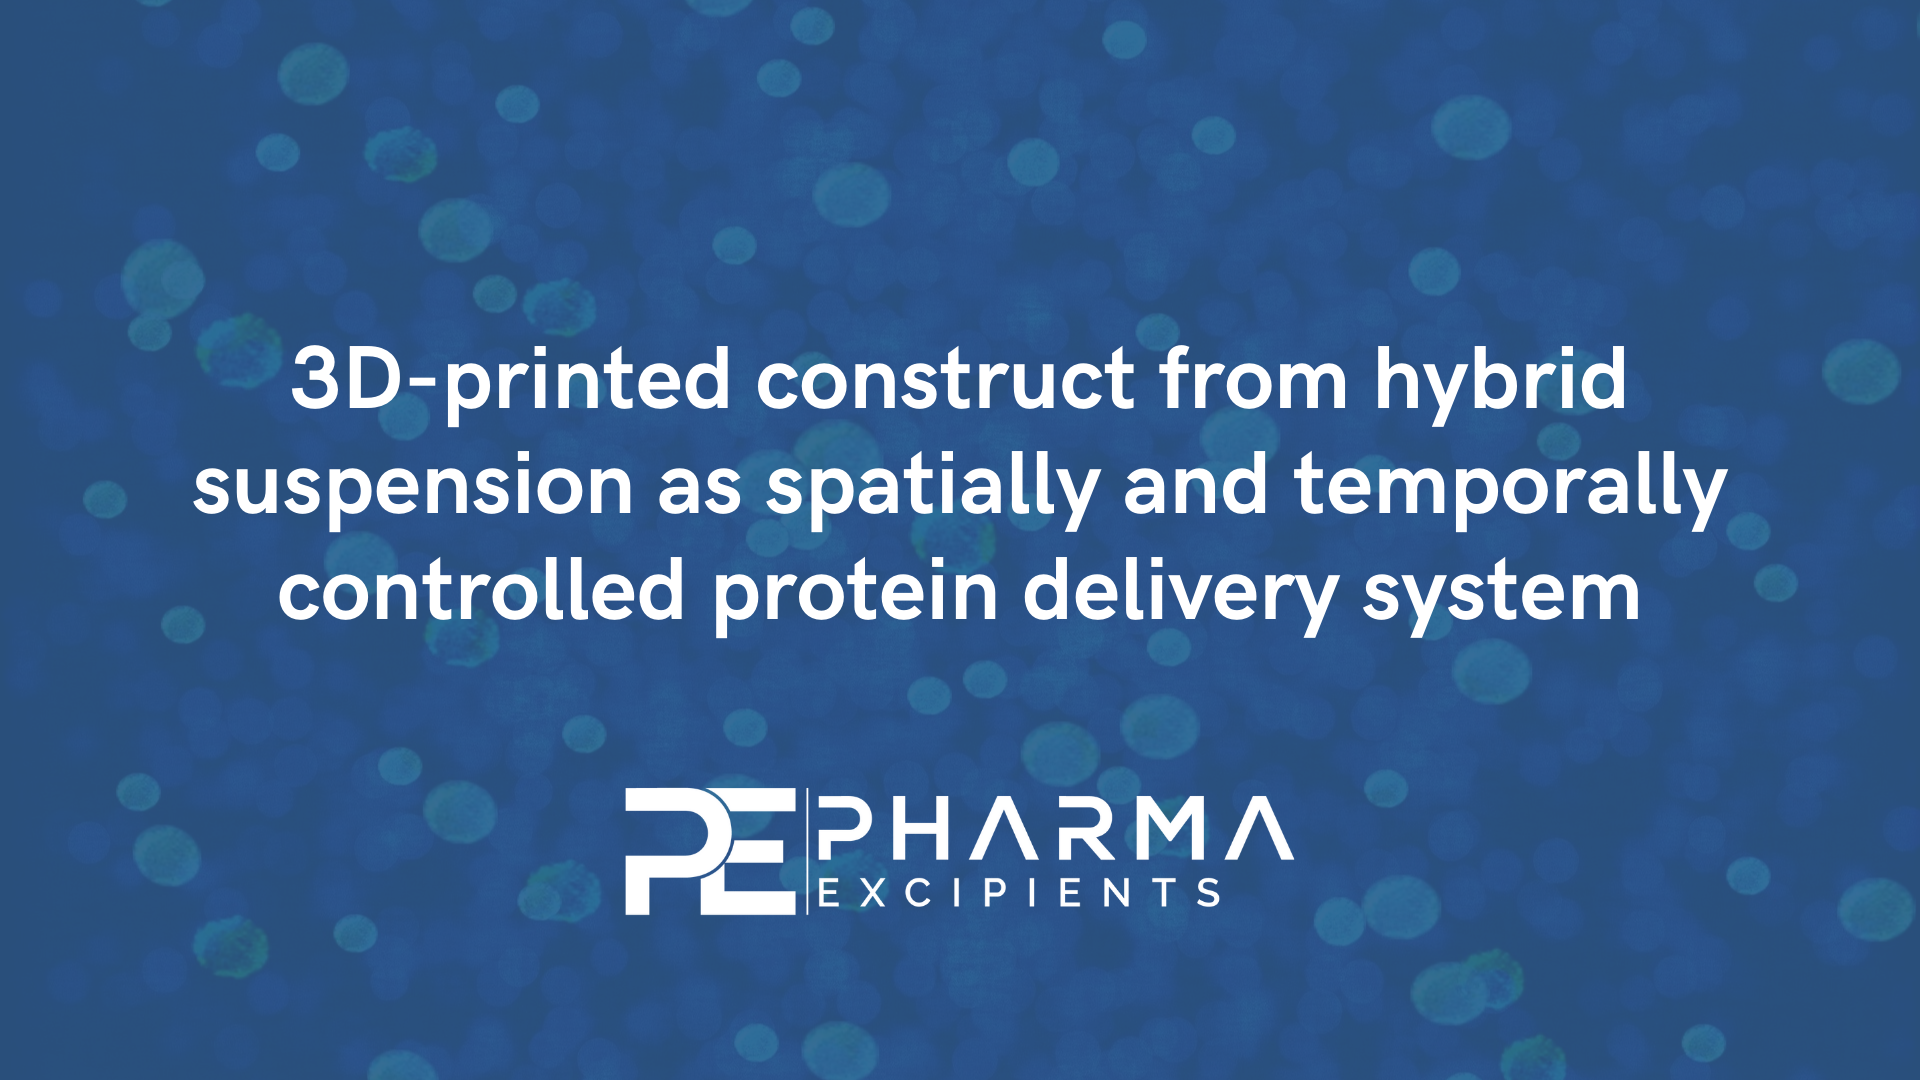 3D-printed construct from hybrid suspension as spatially and temporally controlled protein delivery system